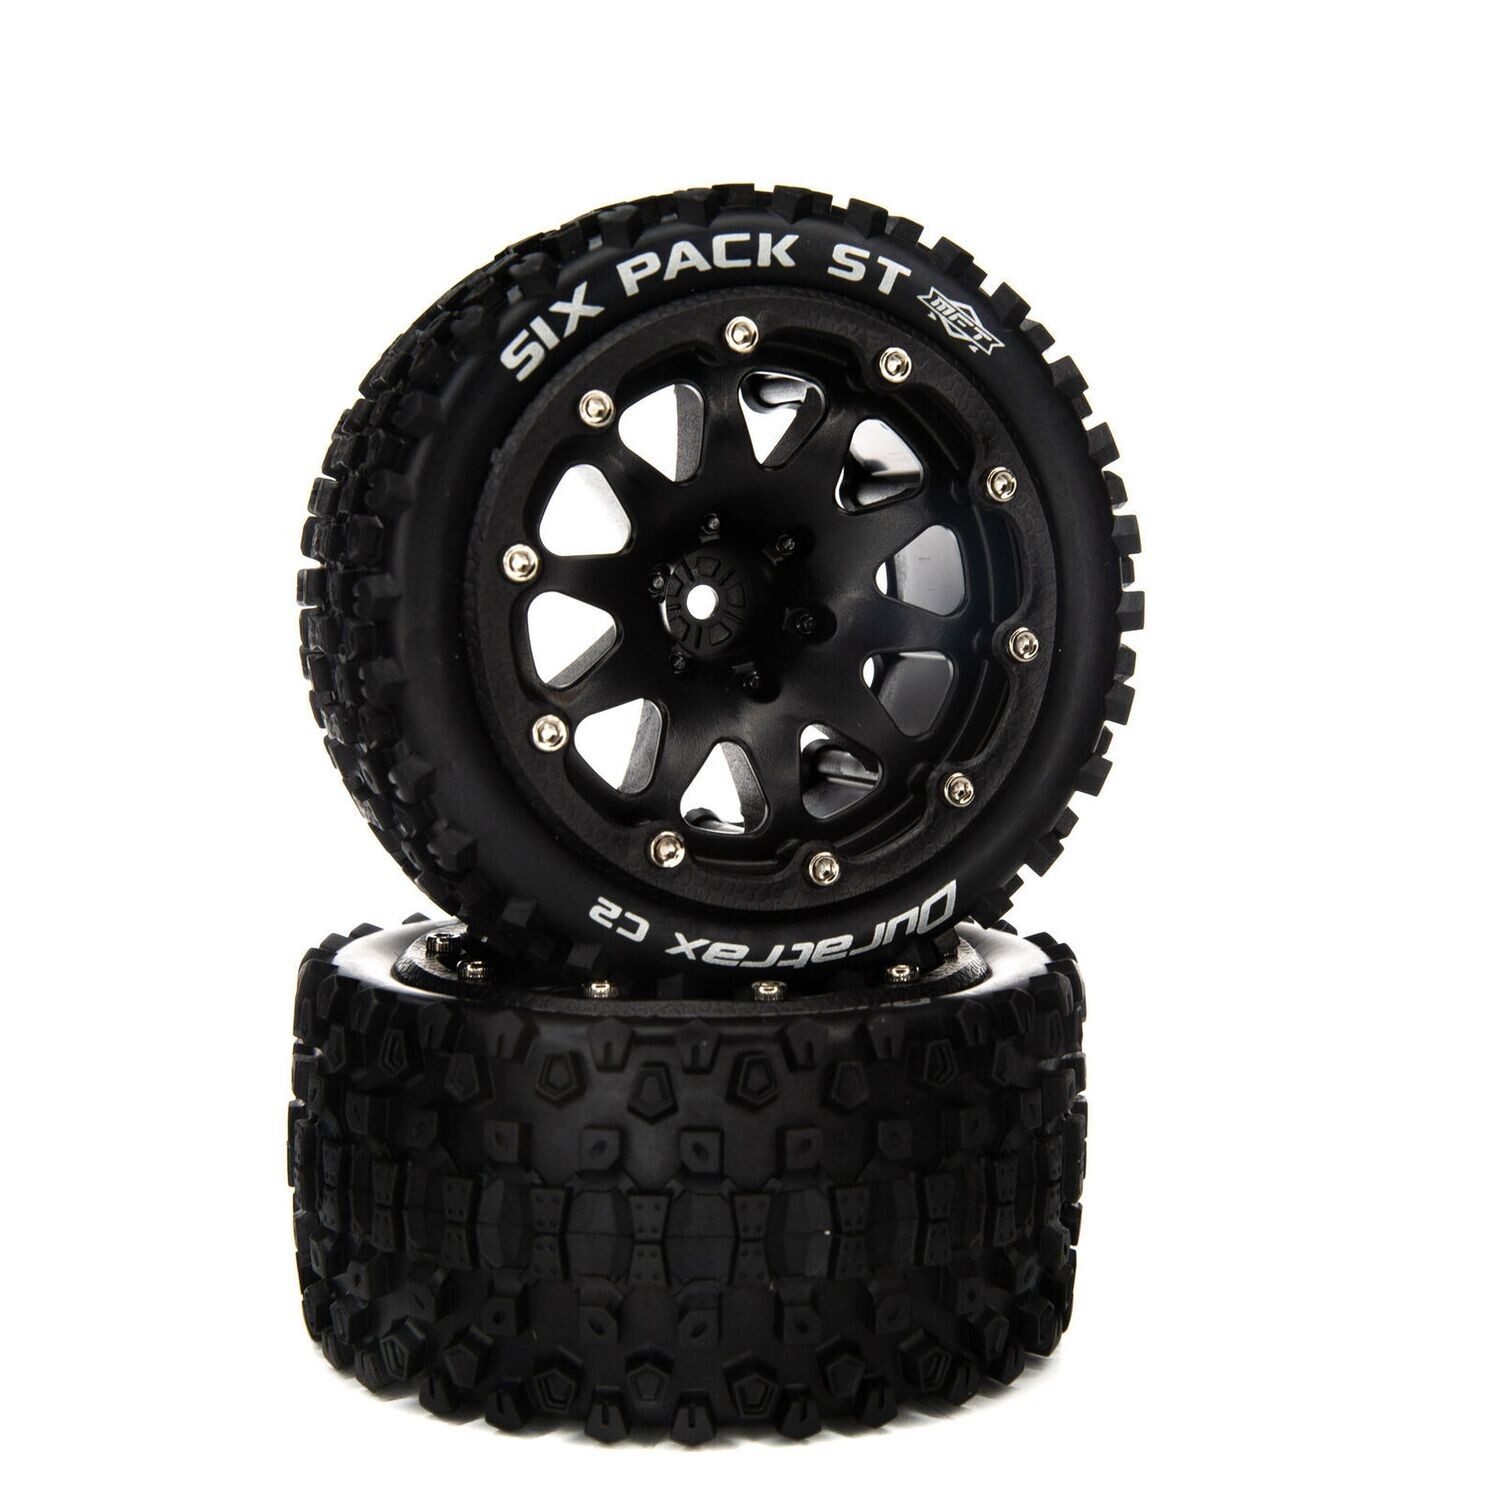 DuraTrax Six Pack ST Belted 2.8" 2WD On-Road Truck Tires w/14mm Hex (Black) (2)